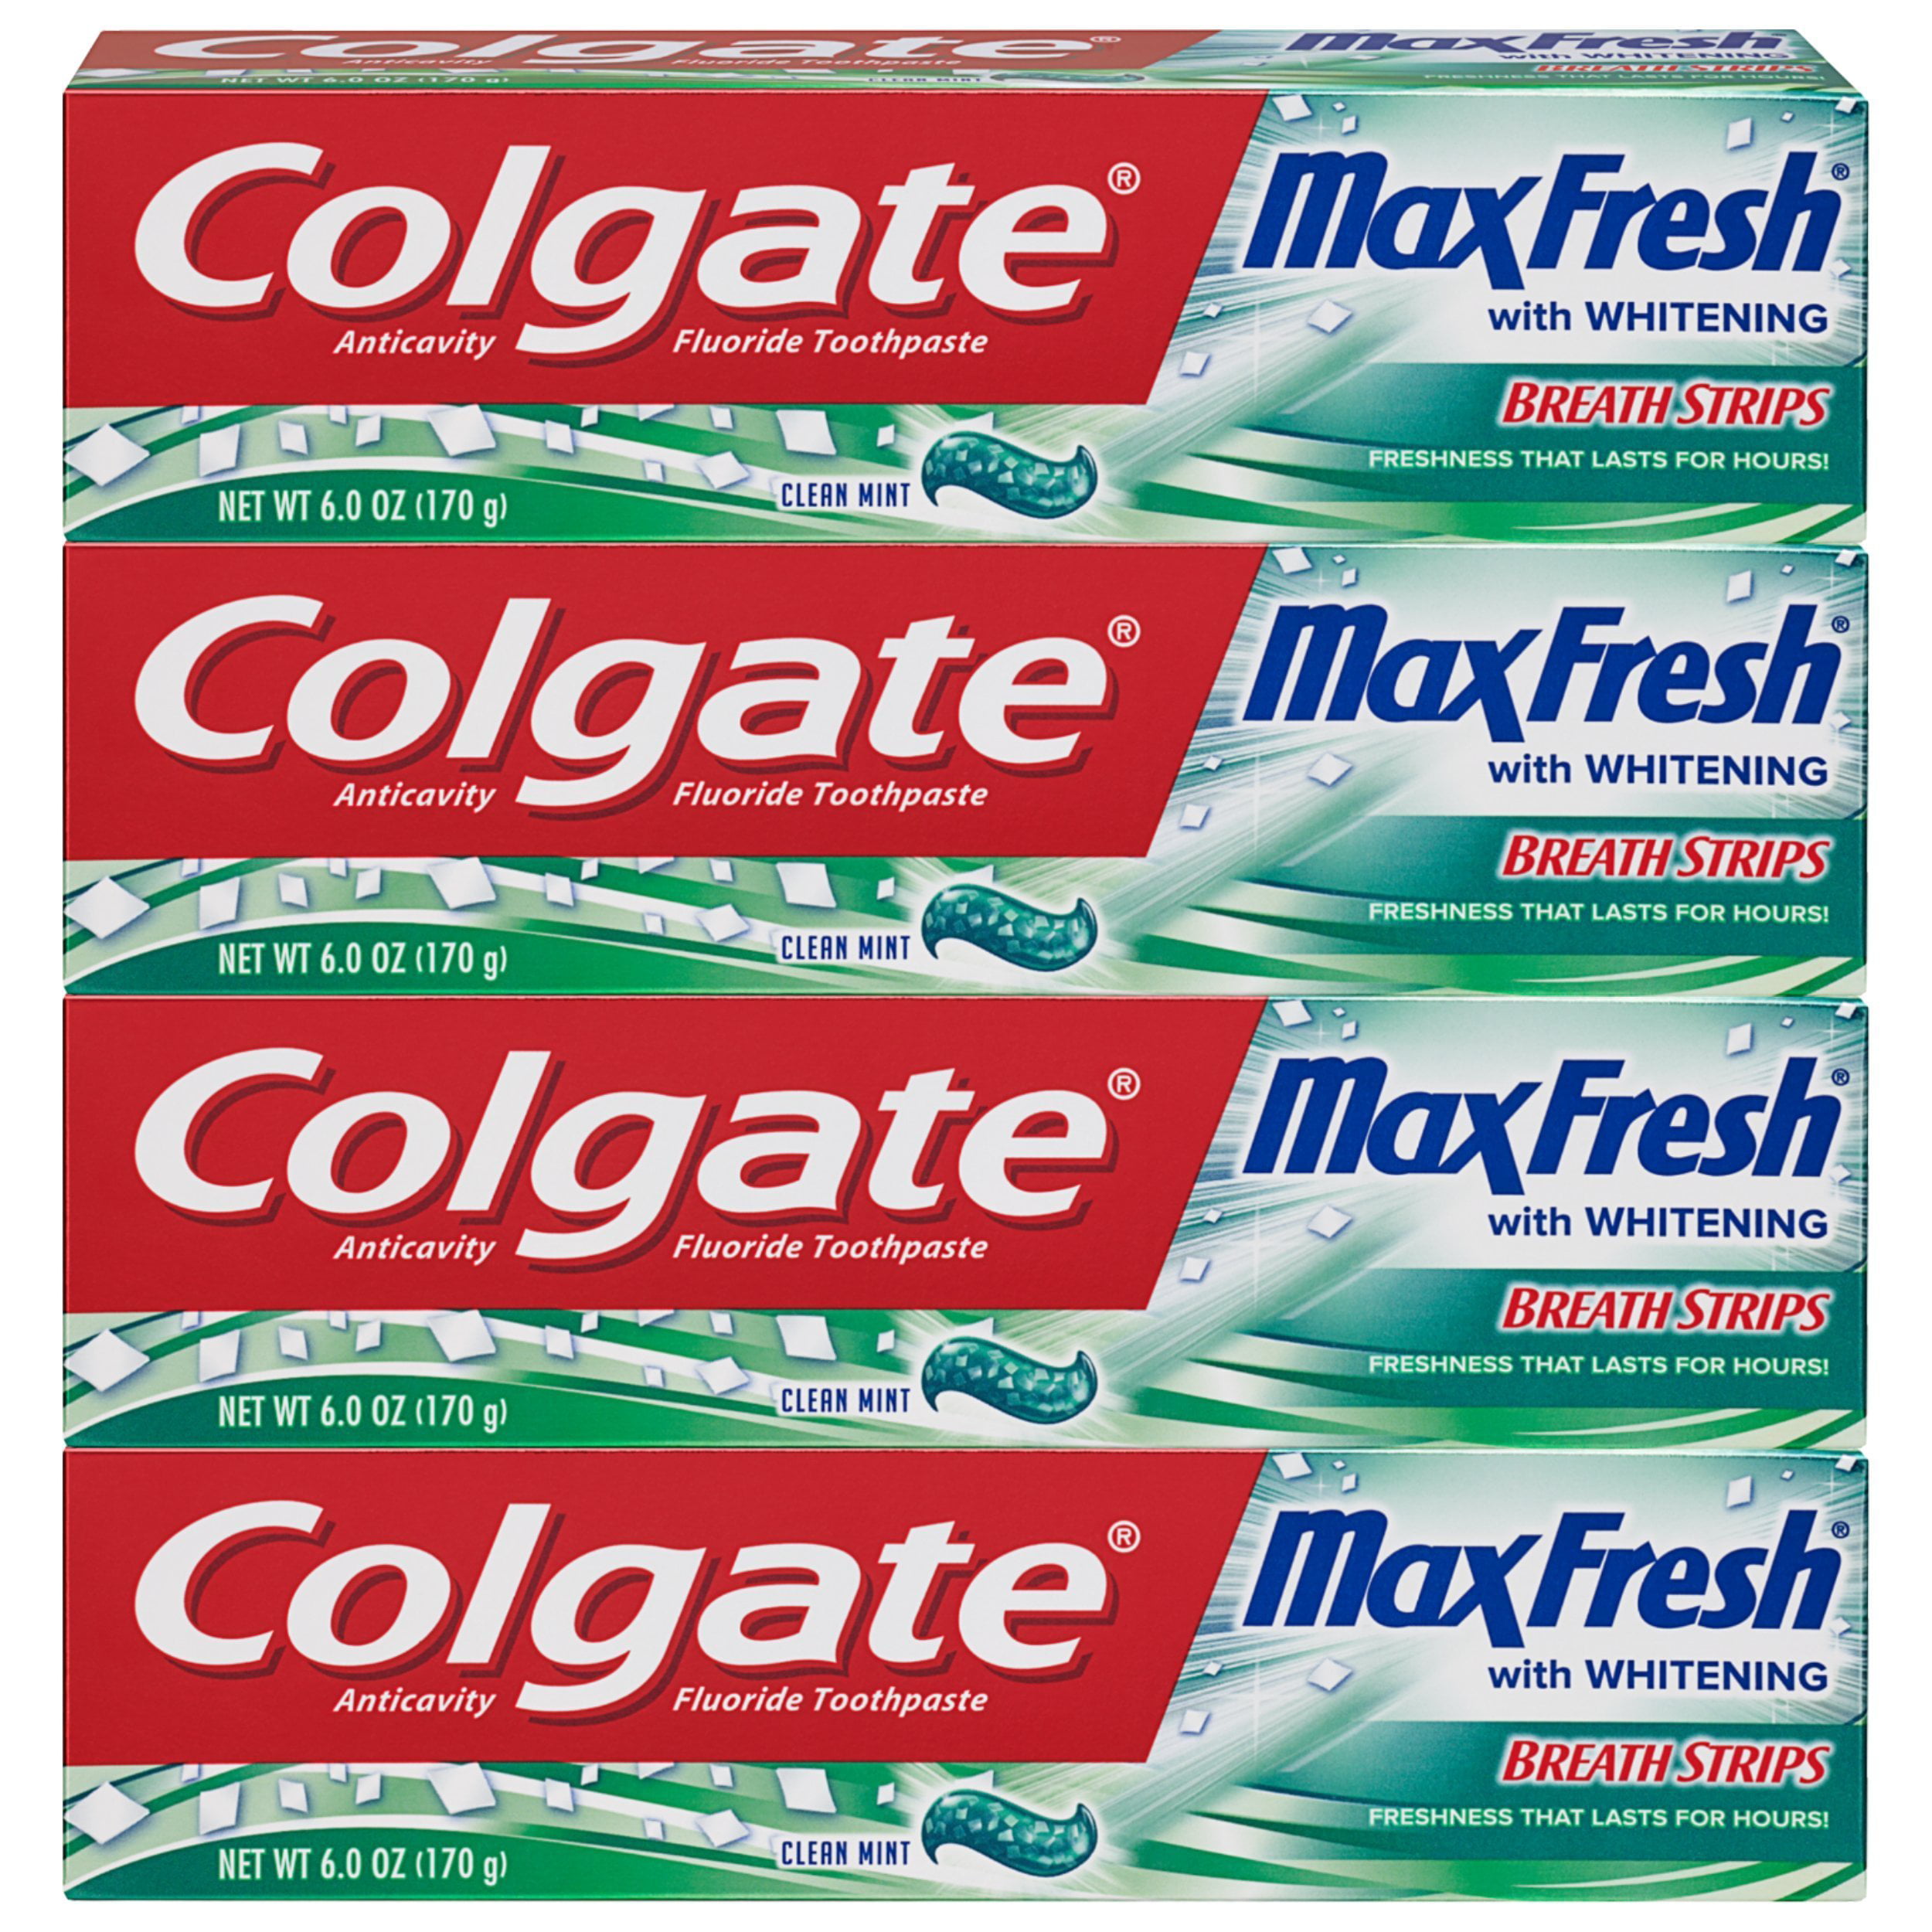 colgate-max-fresh-whitening-toothpaste-with-breath-strips-clean-mint